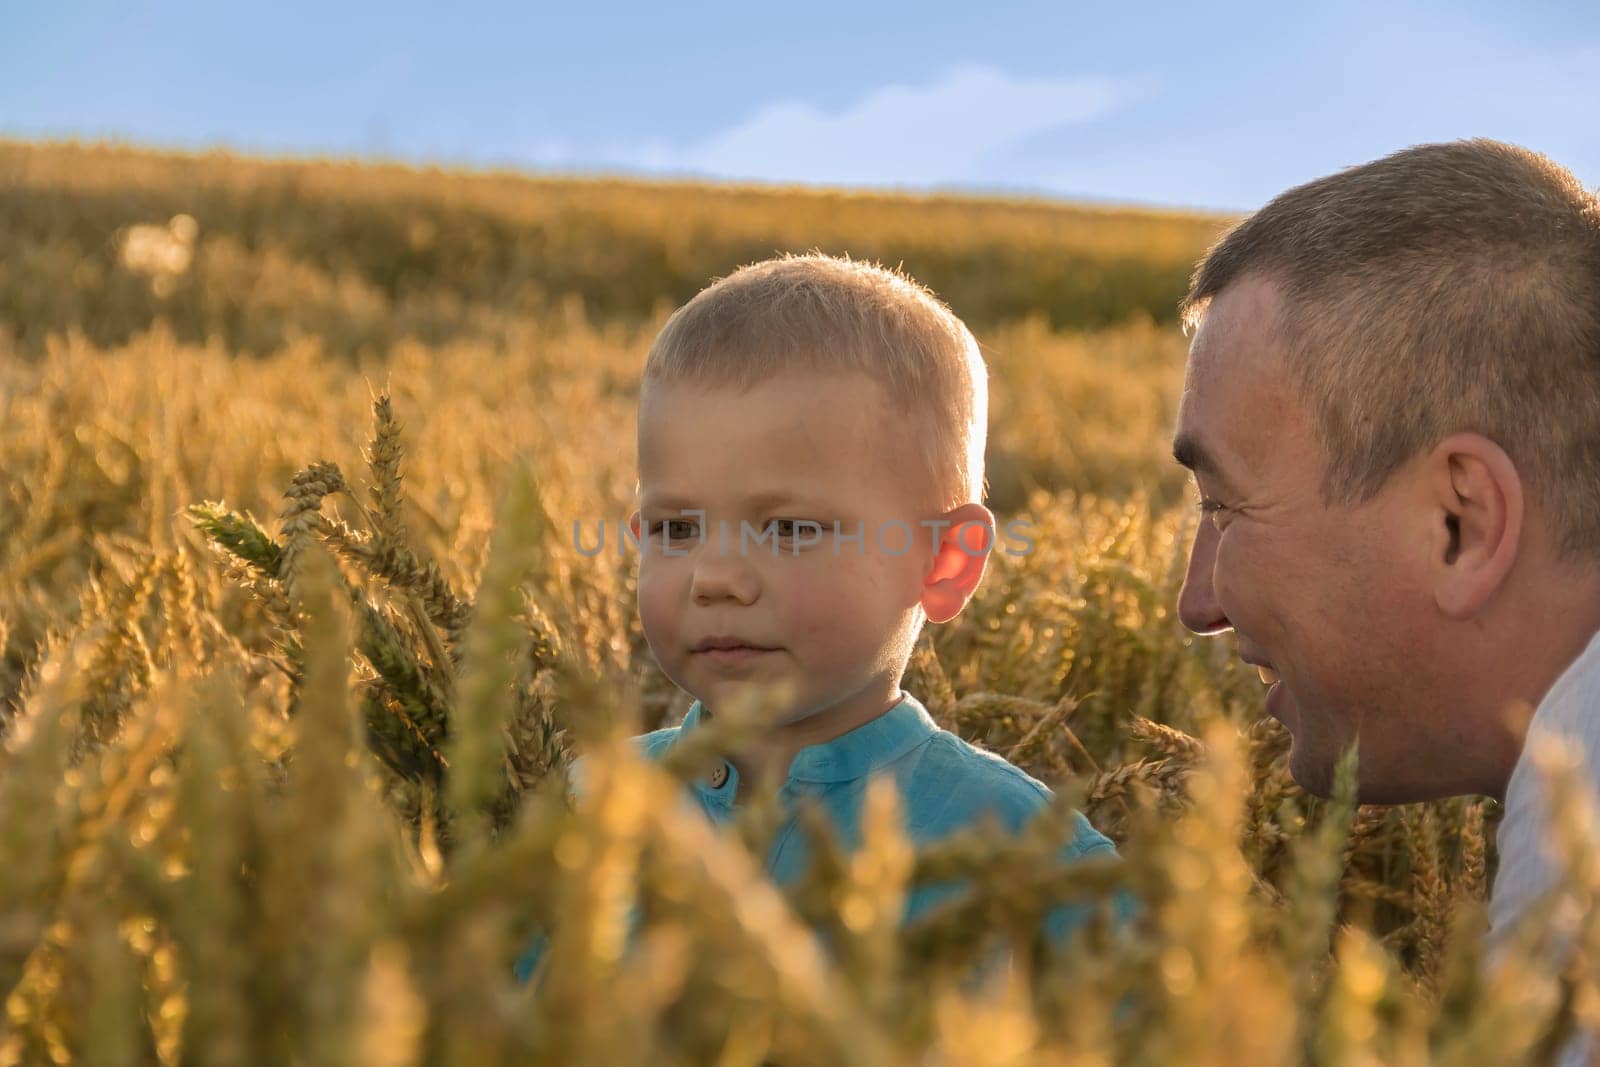 Dad and his little son are having fun walking in a field with ripe wheat. Grain for making bread. the concept of economic crisis and hunger